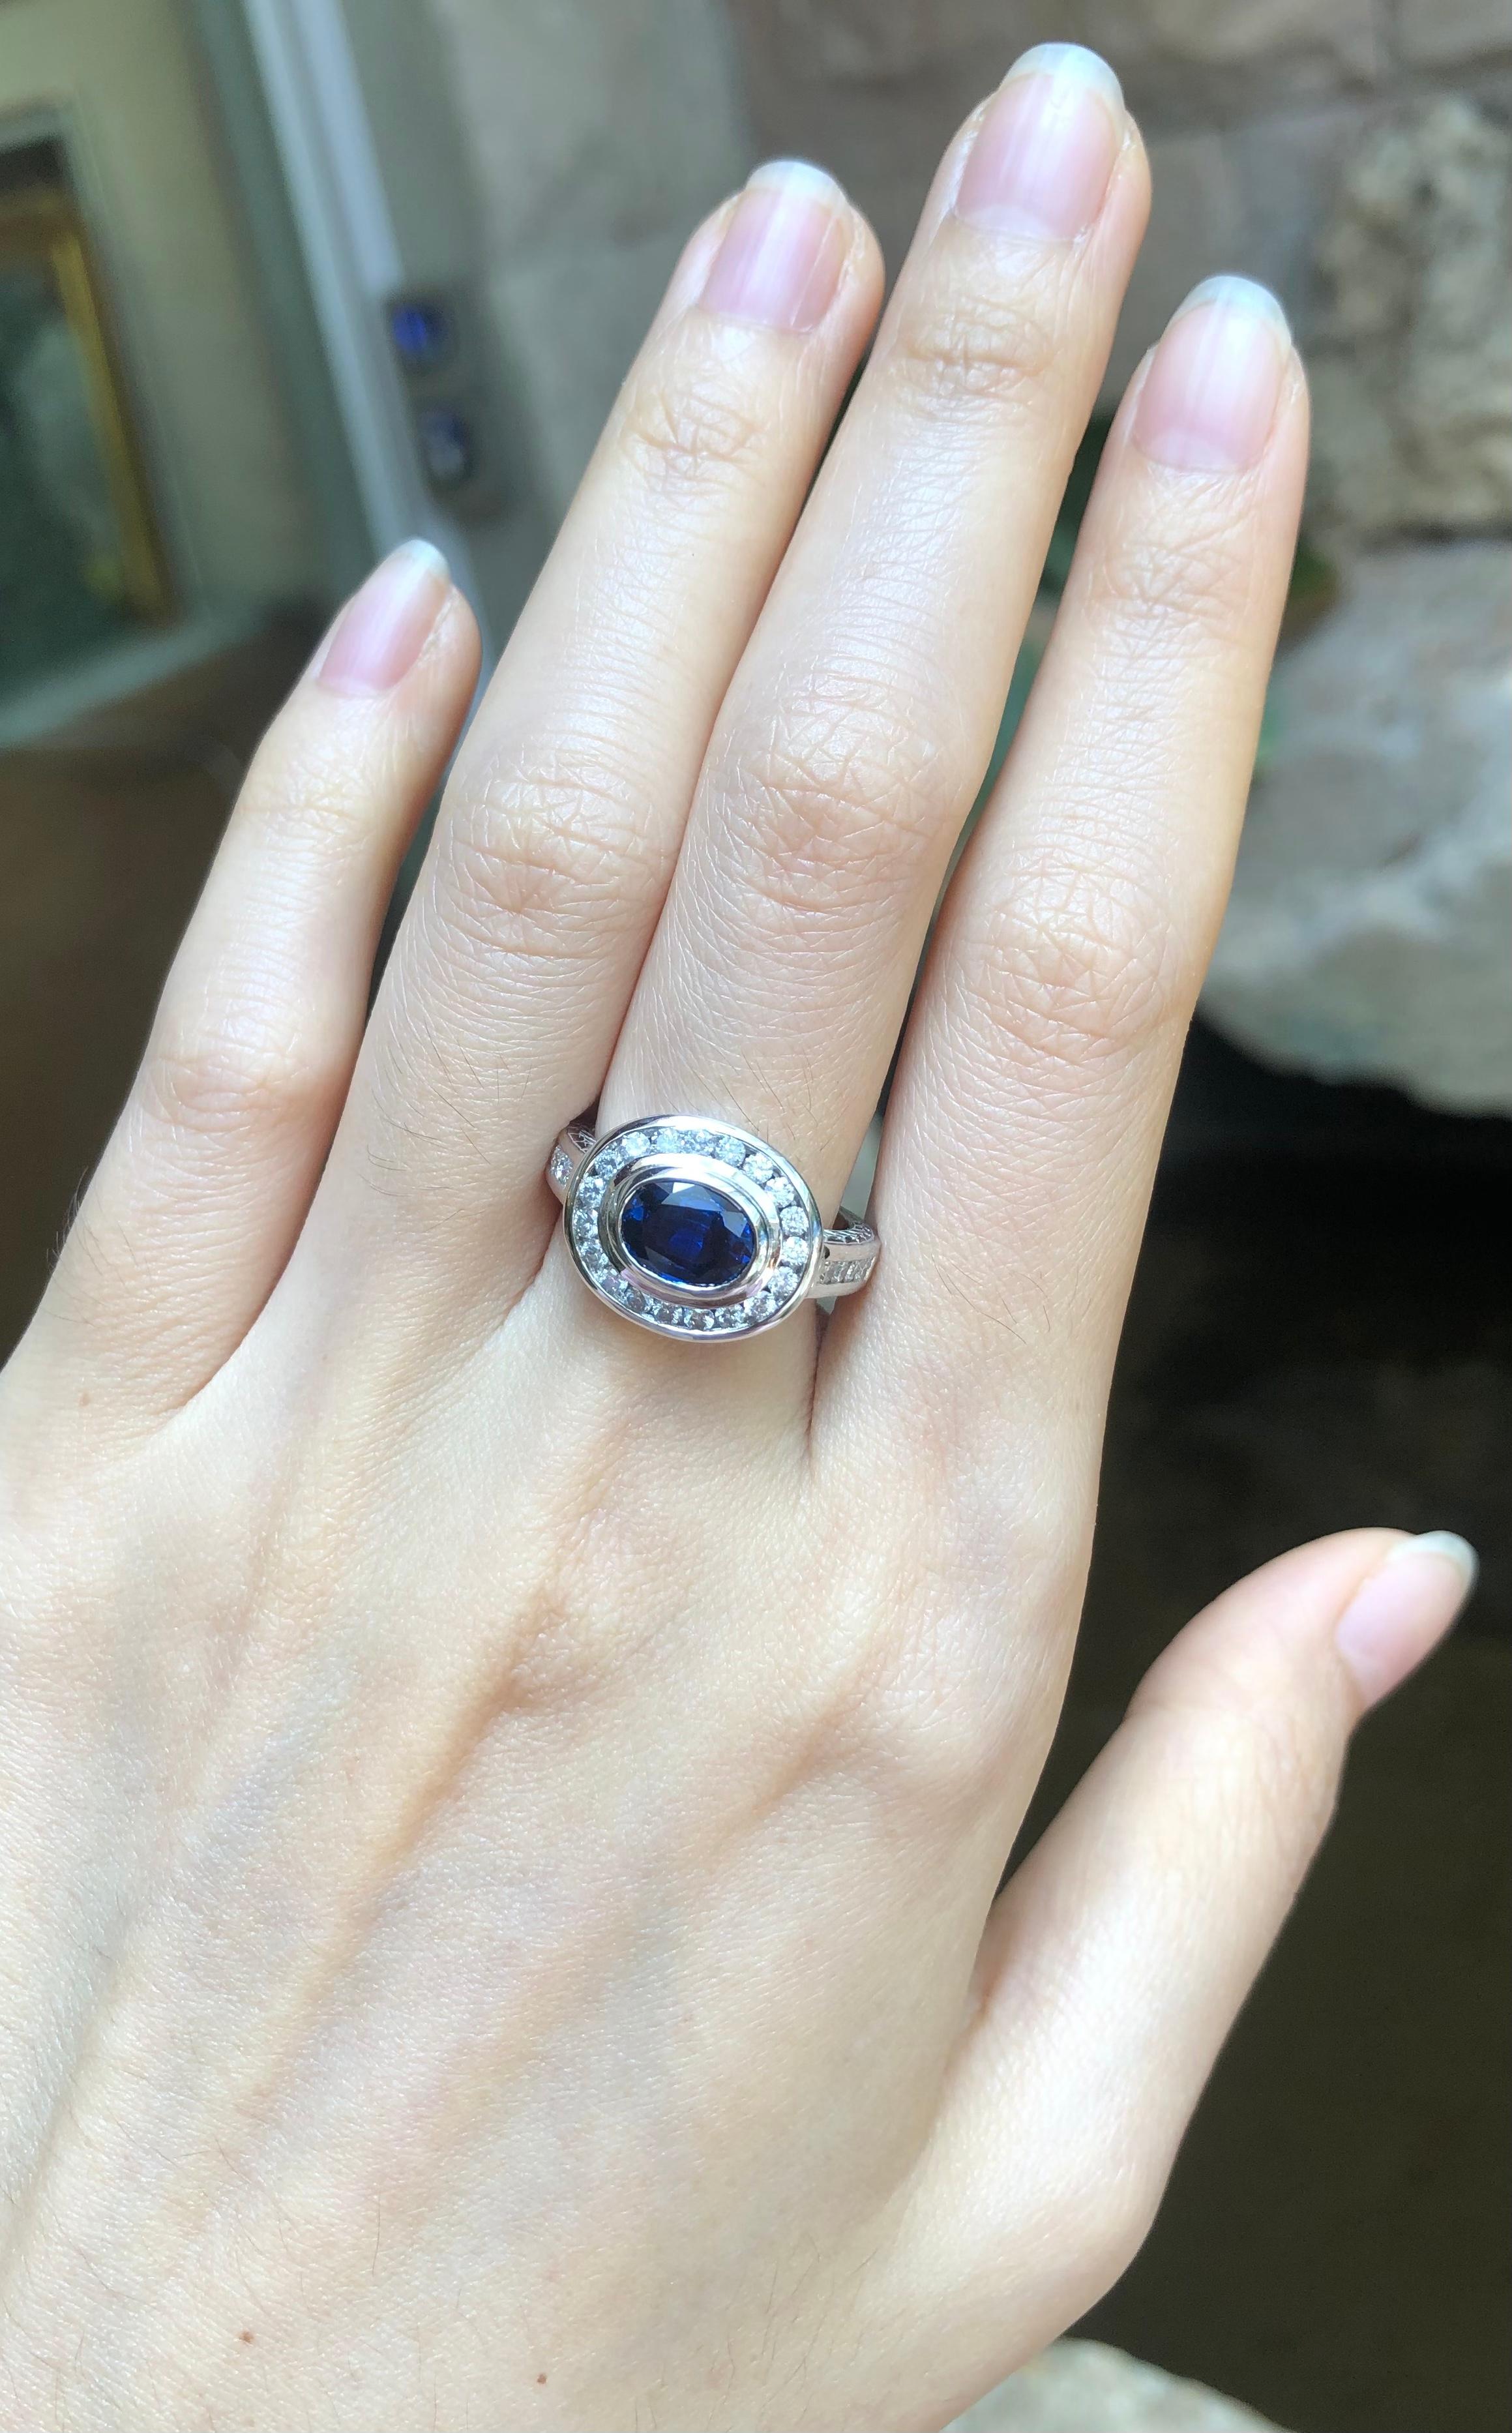 Blue Sapphire 1.52 carats with Diamond 0.58 carat Ring set in 18 Karat White Gold Settings

Width:  1.5 cm 
Length: 1.2 cm
Ring Size: 53
Total Weight: 7.79 grams

